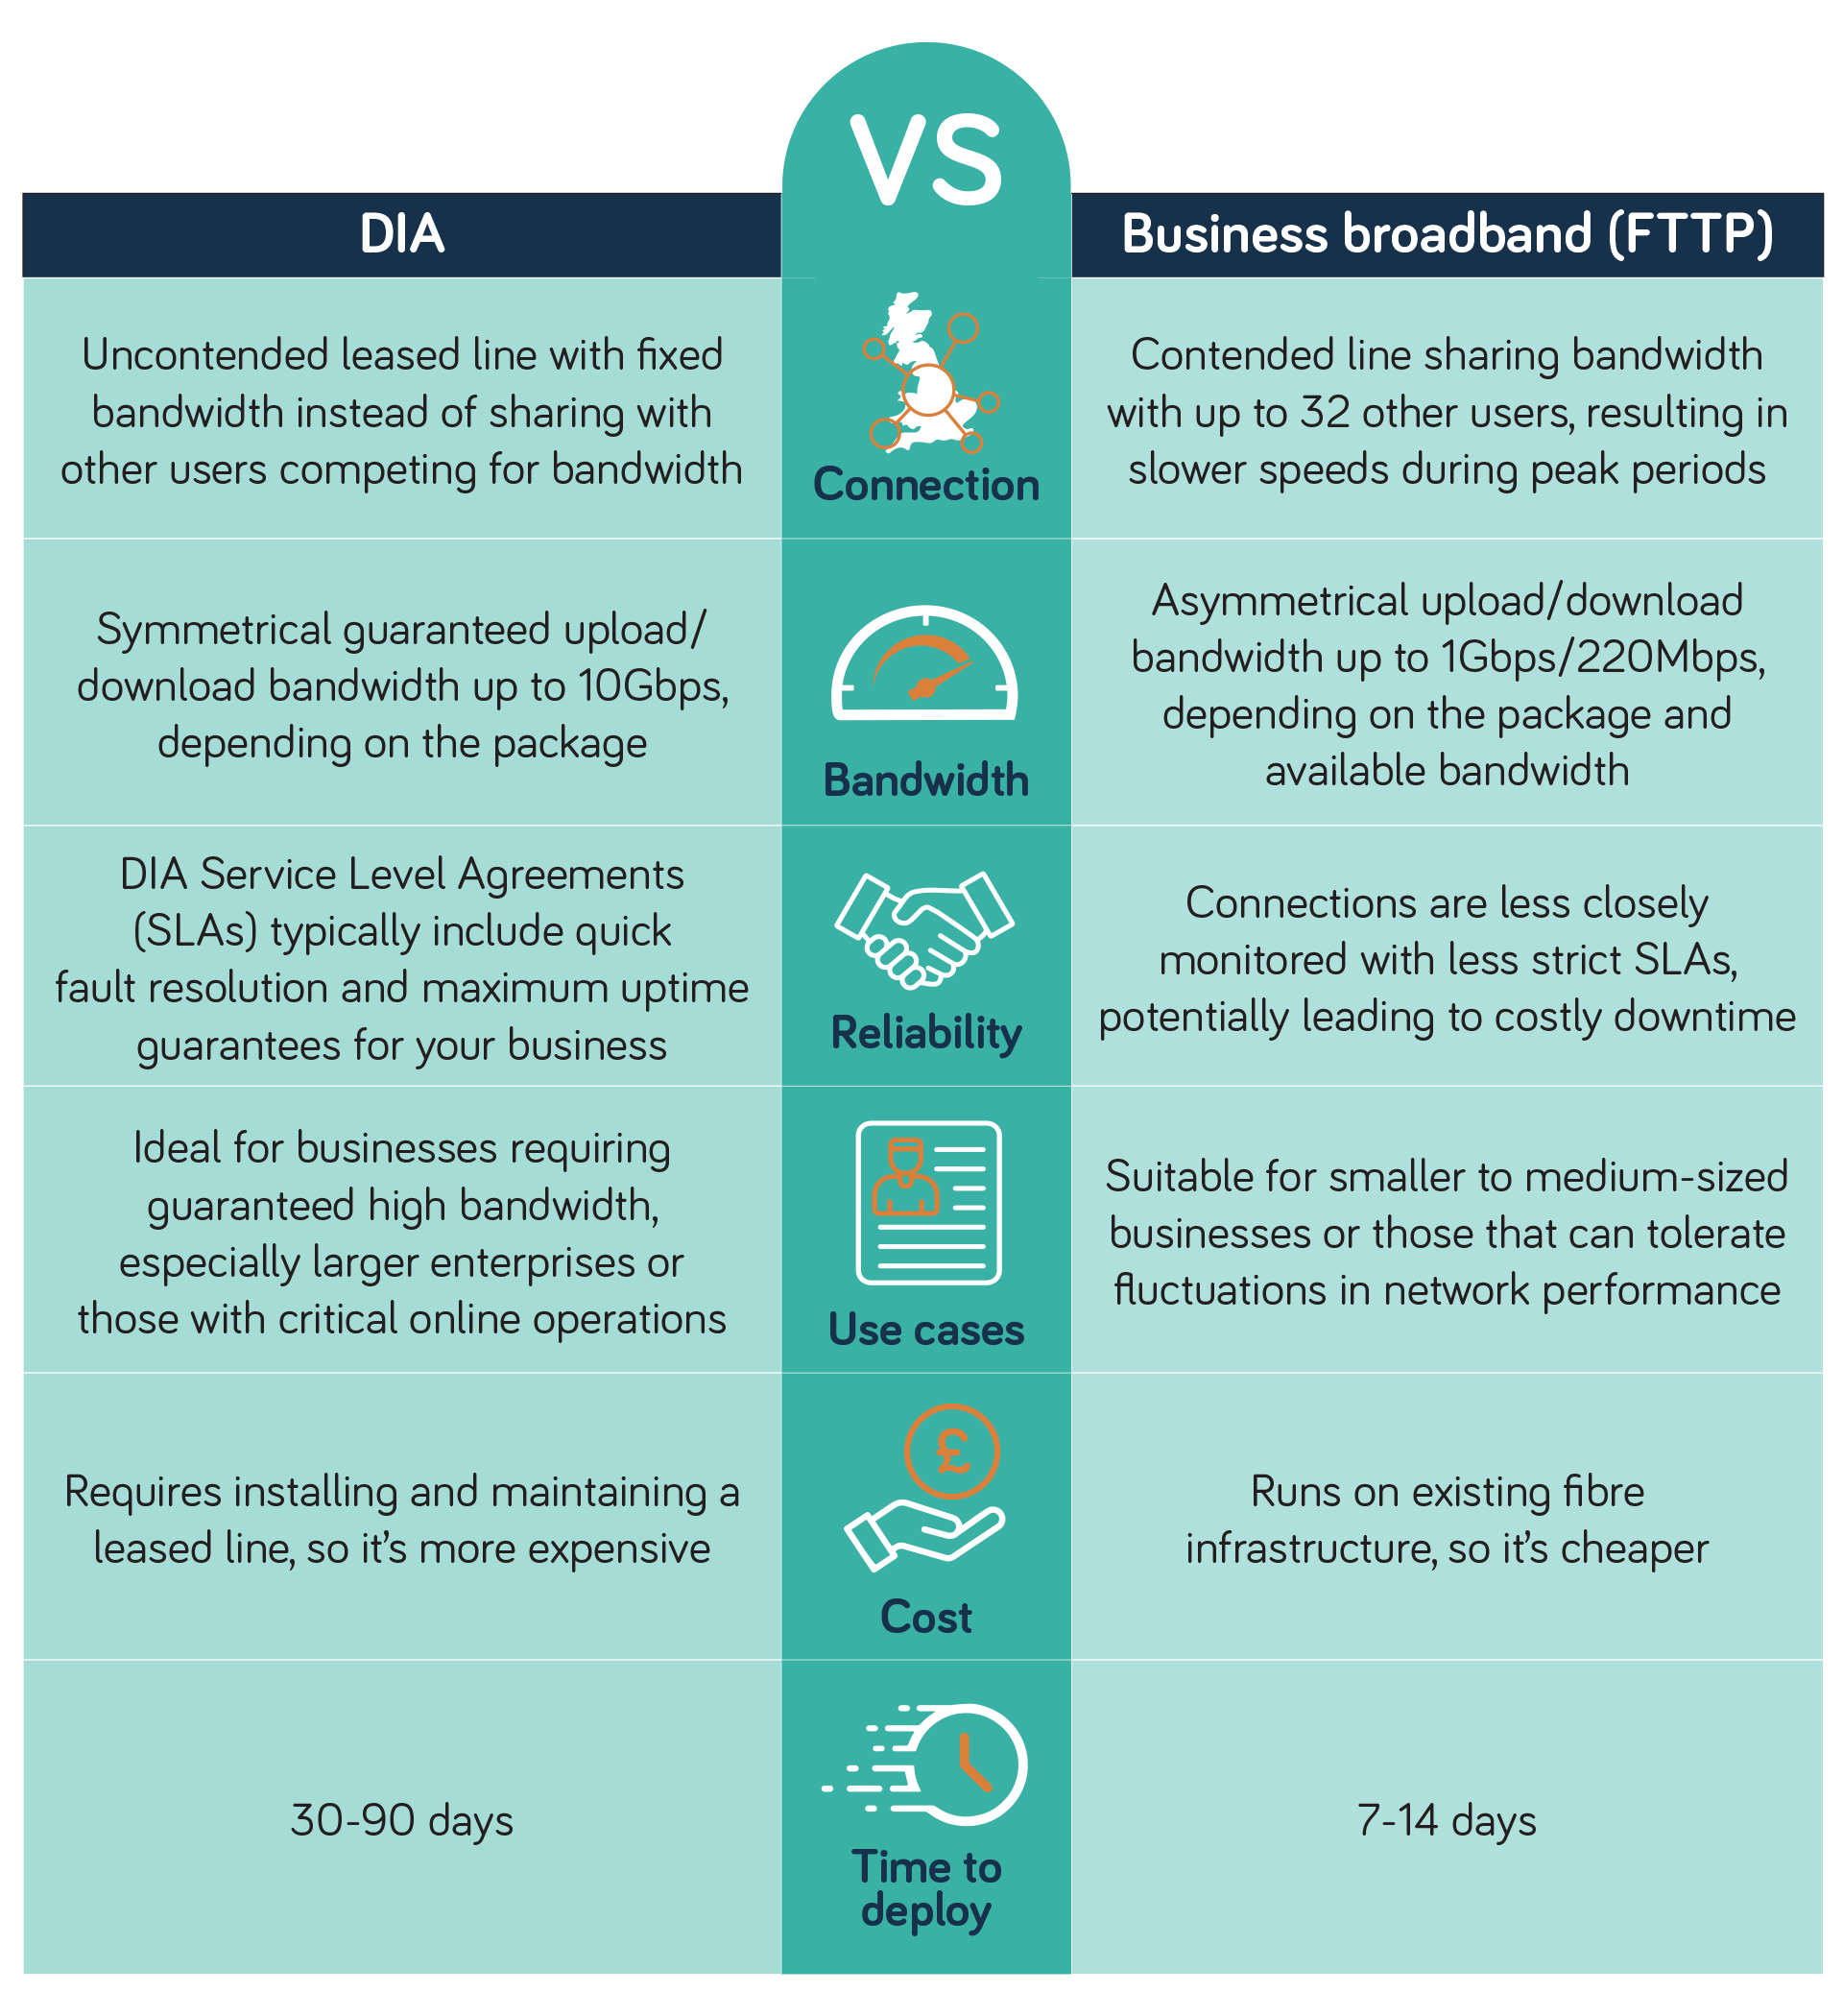 Dedicated internet access vs business broadband: graphic comparing the connection, bandwidth, reliability, use cases, cost and time to deploy